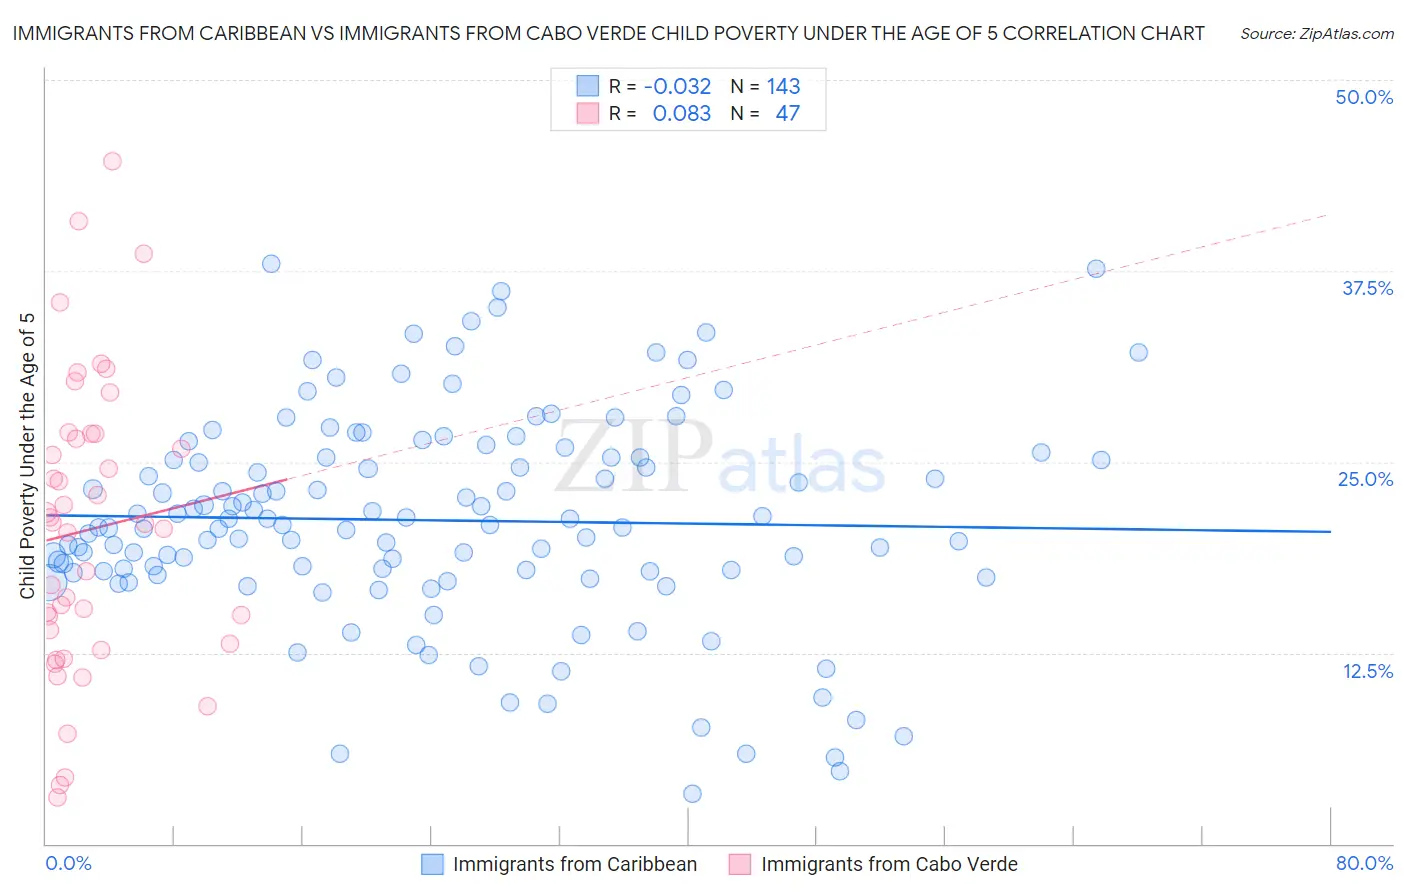 Immigrants from Caribbean vs Immigrants from Cabo Verde Child Poverty Under the Age of 5